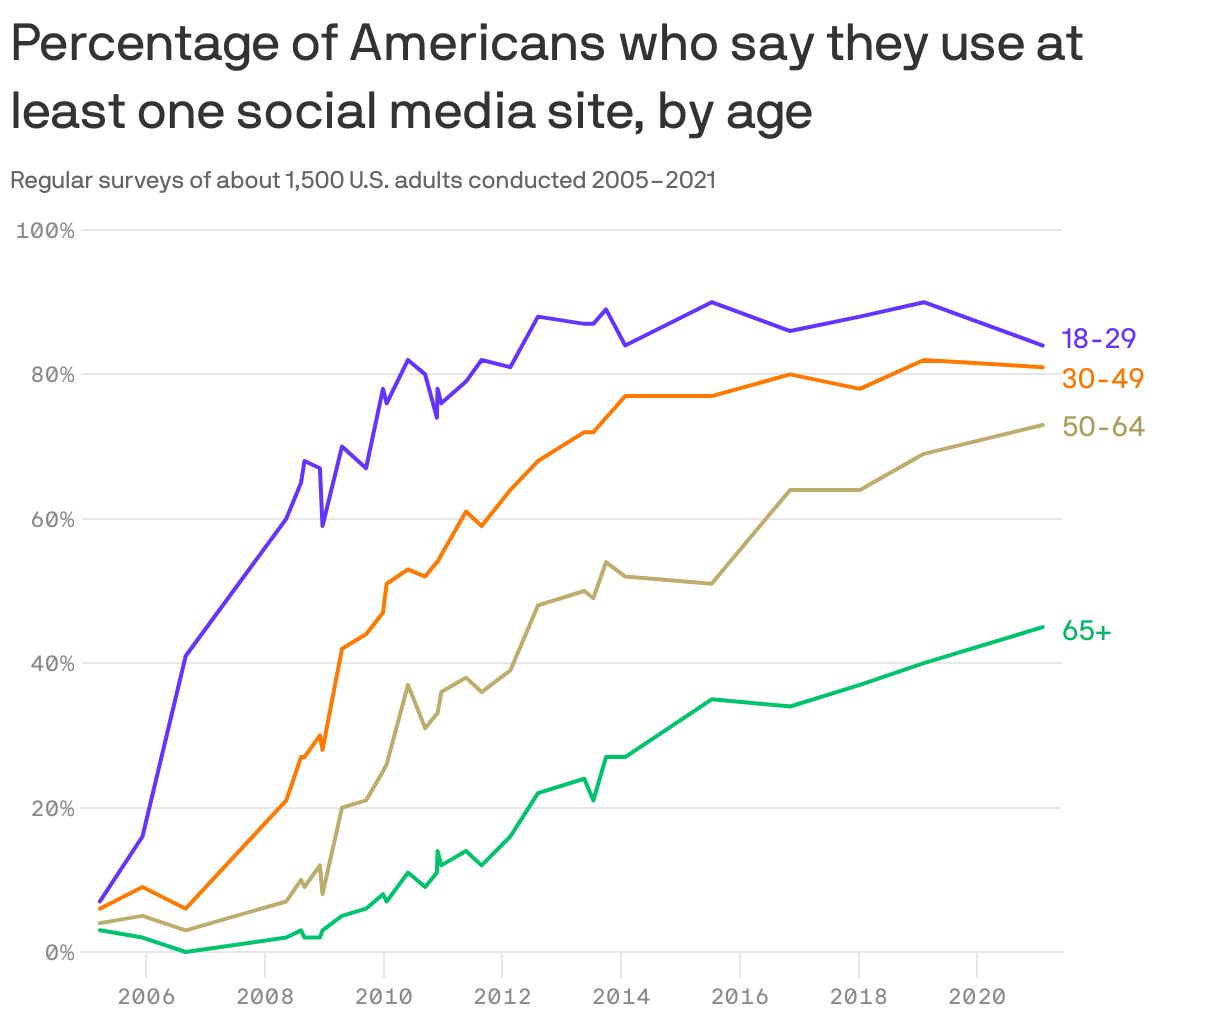 Percentage of Americans who say they use at least one social media site, by age